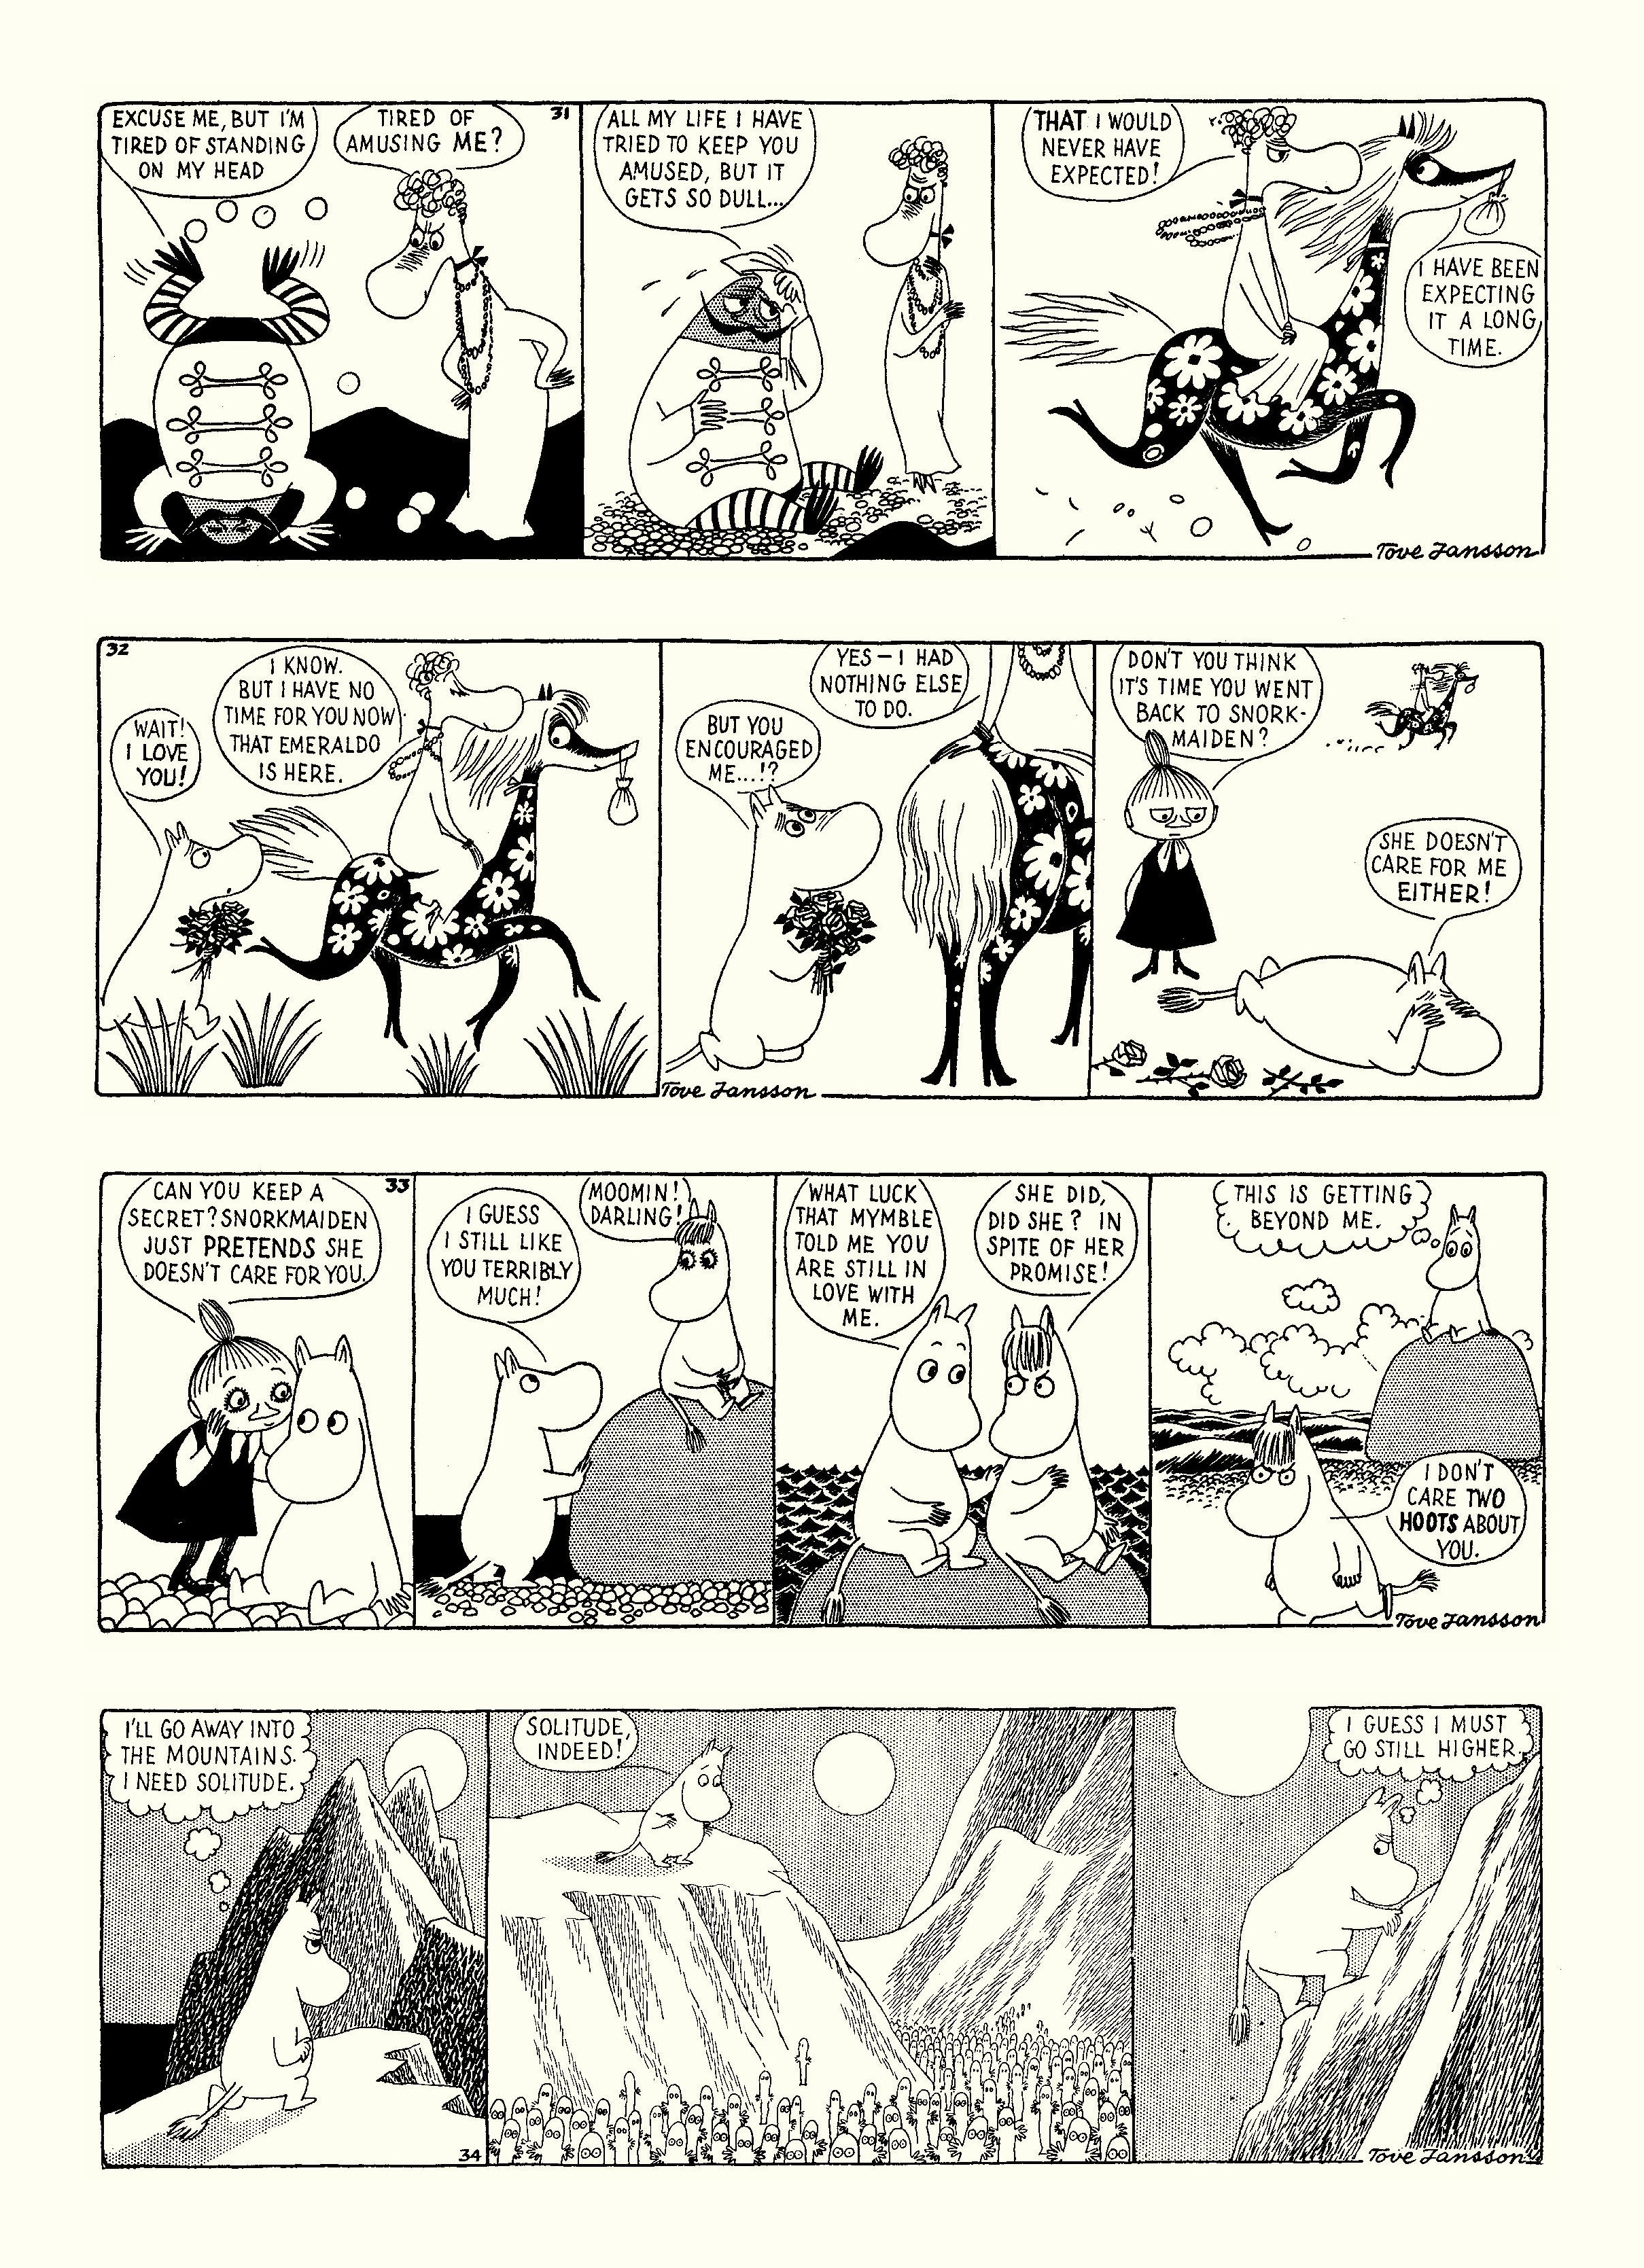 Read online Moomin: The Complete Tove Jansson Comic Strip comic -  Issue # TPB 3 - 14